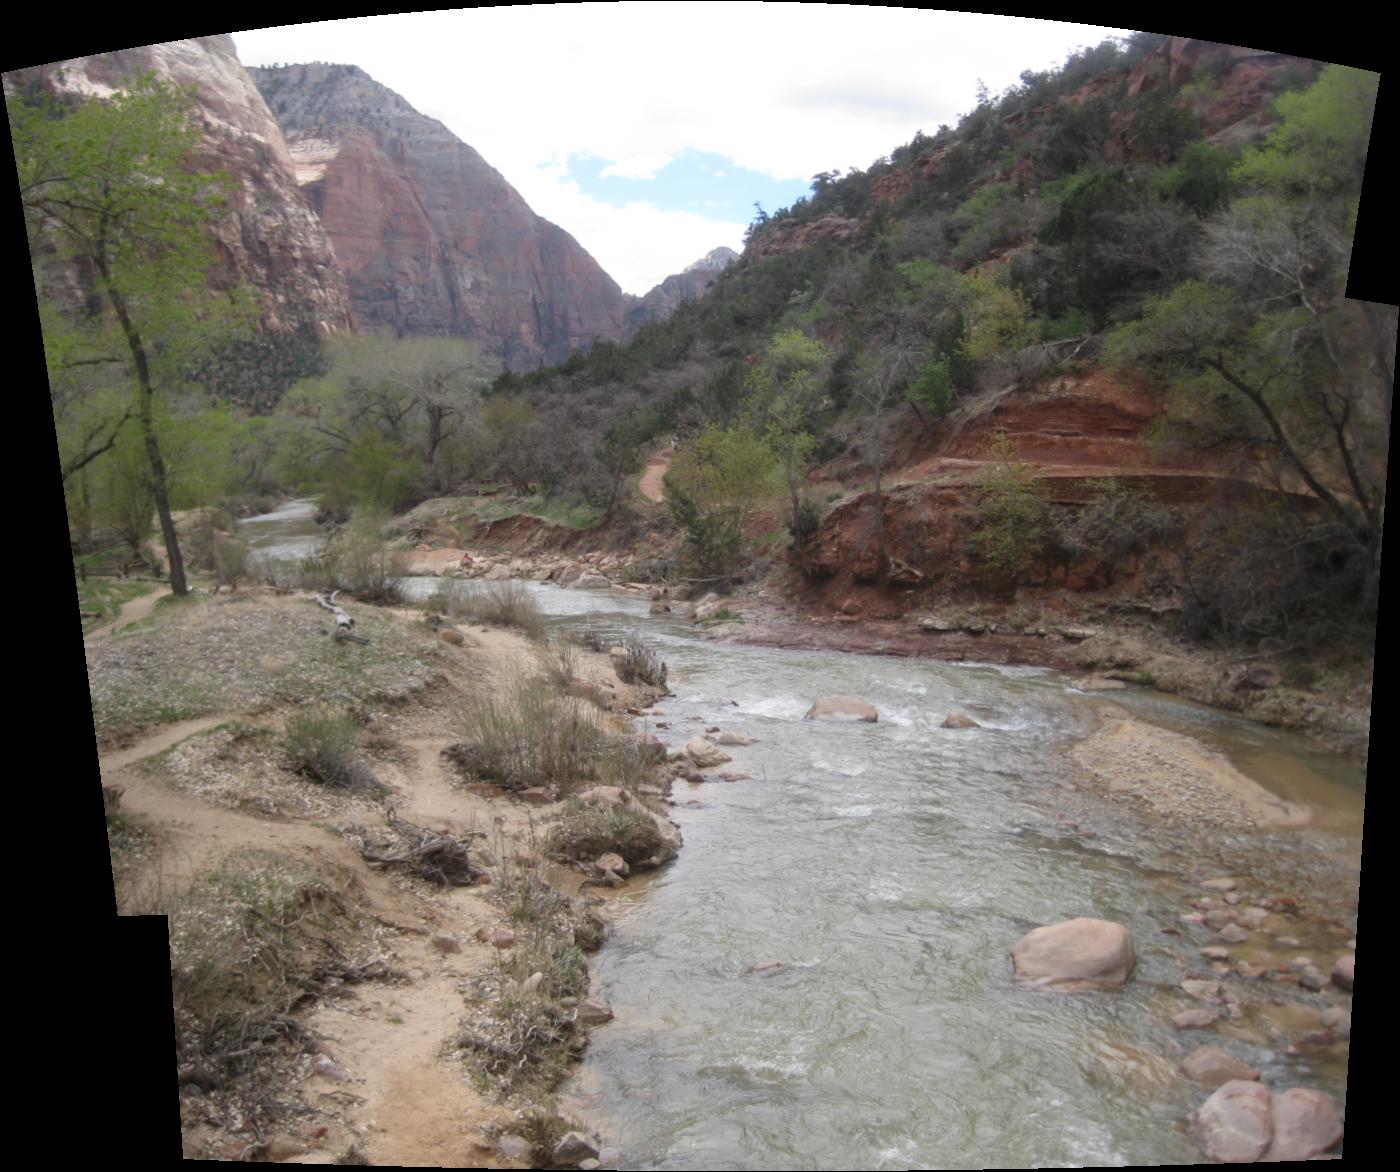 panoramic photo of the river going through Zion National Park